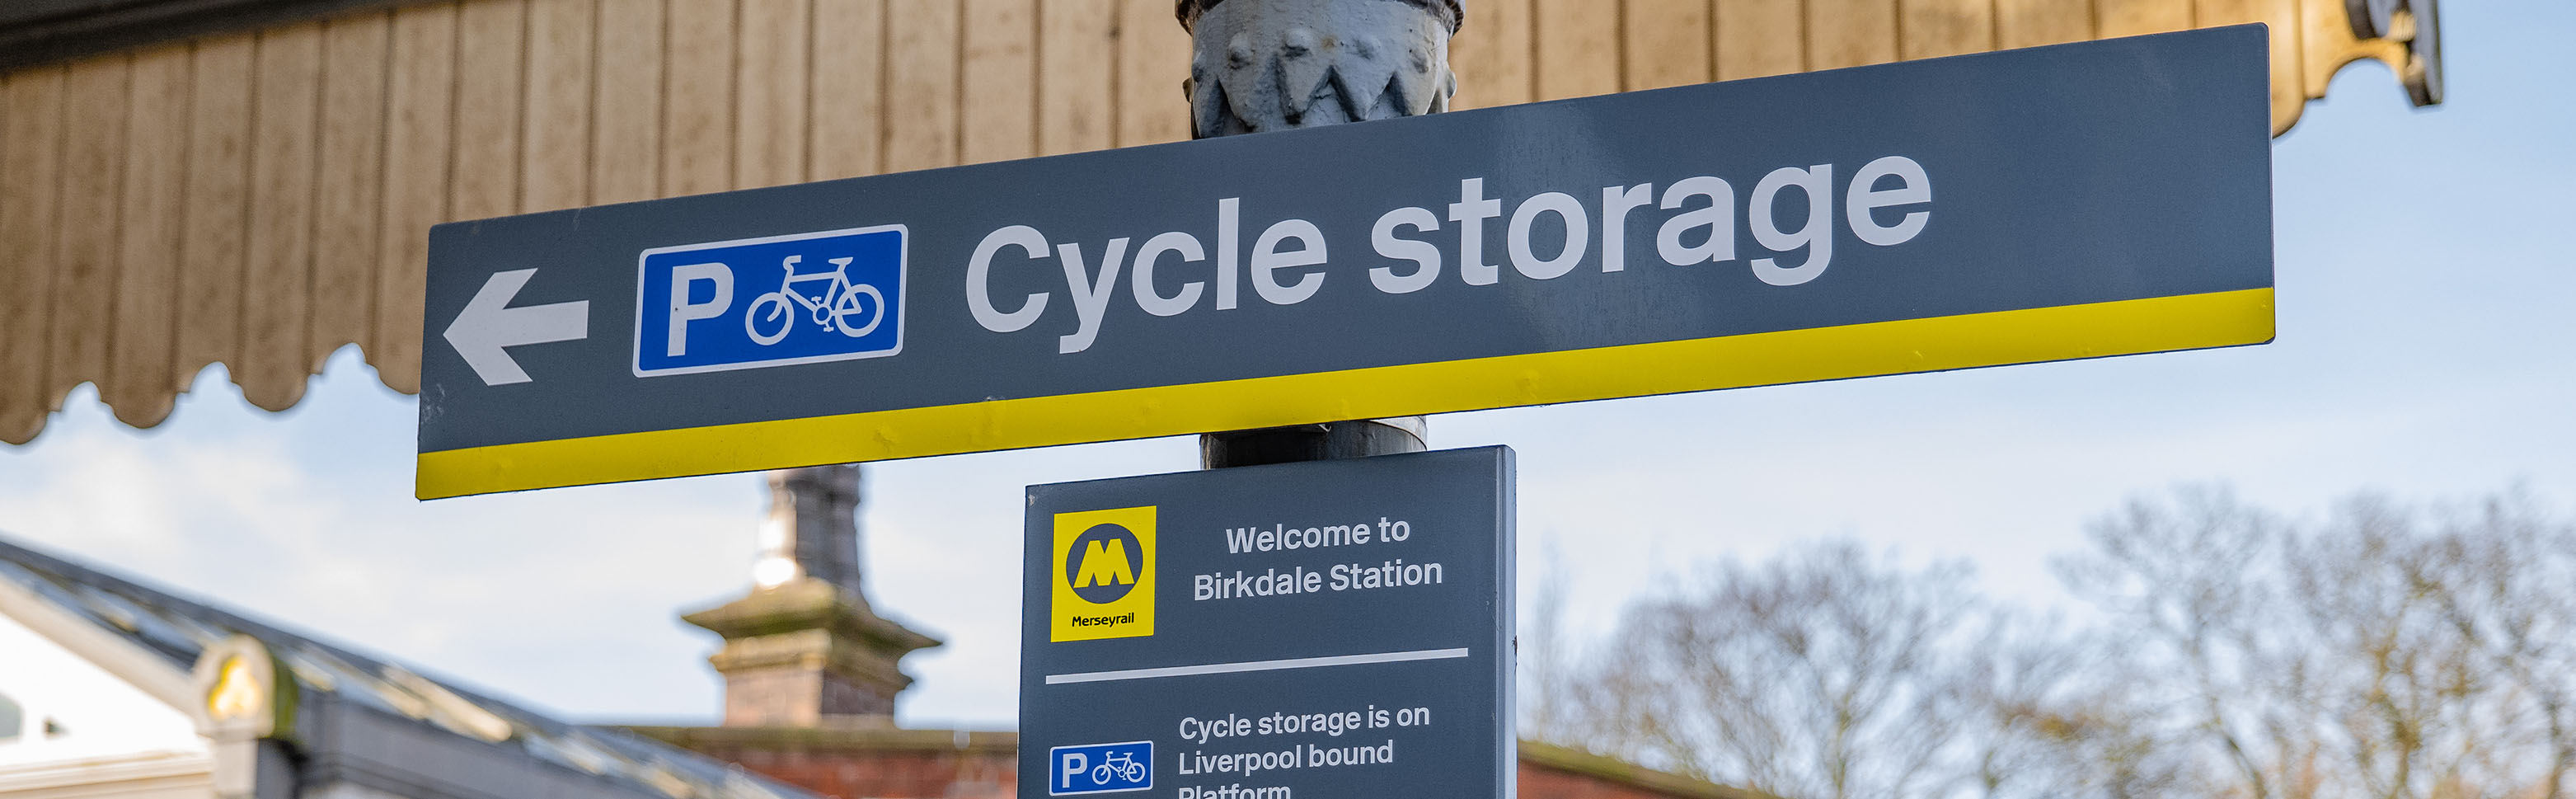 A sign fixed to a post shows directions for cycle storage at a station.  